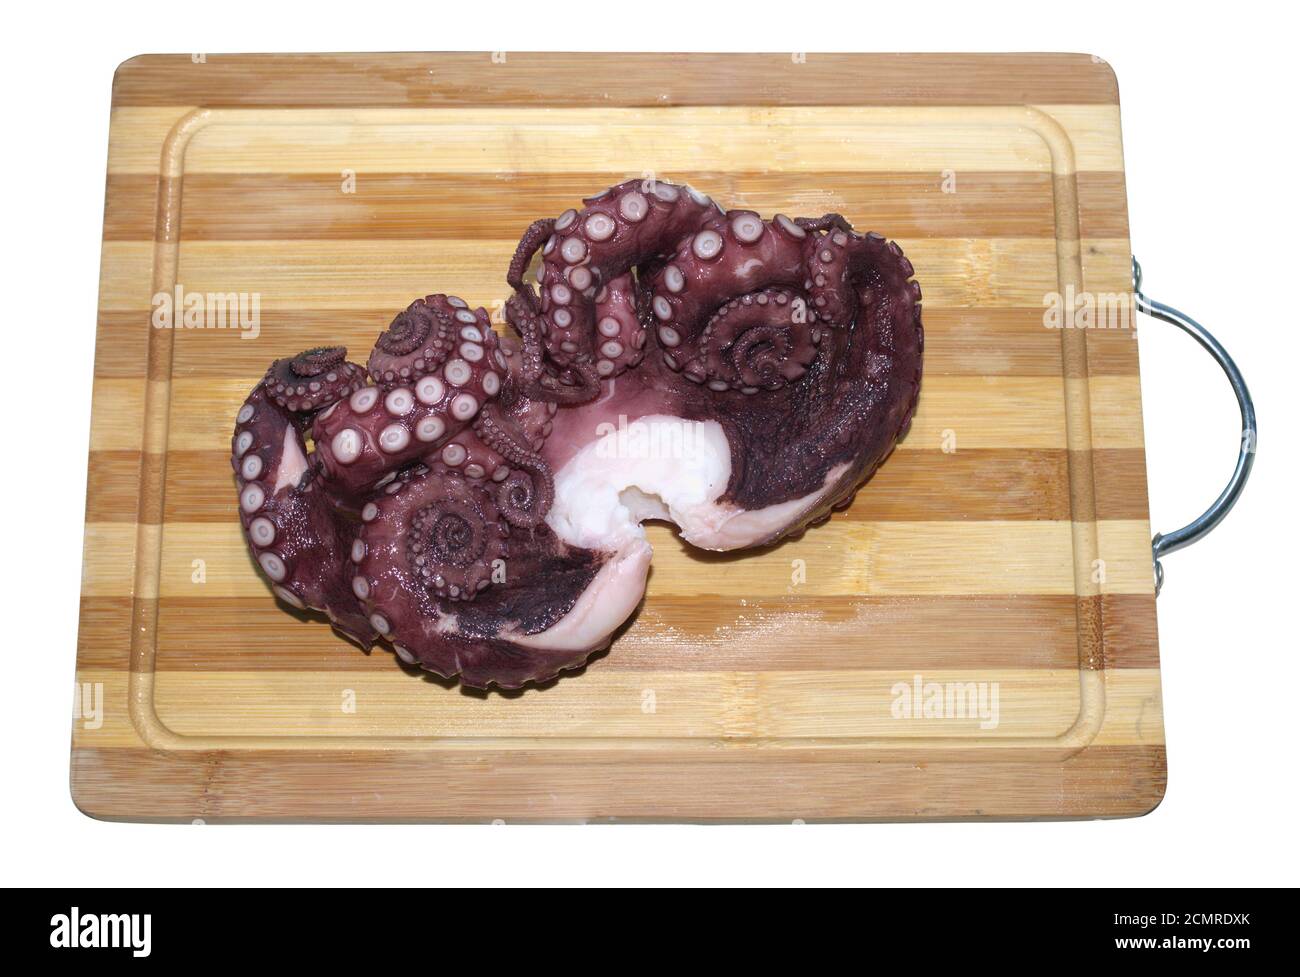 On the wooden kitchen cutting board lies a fresh red marine octopus Stock Photo